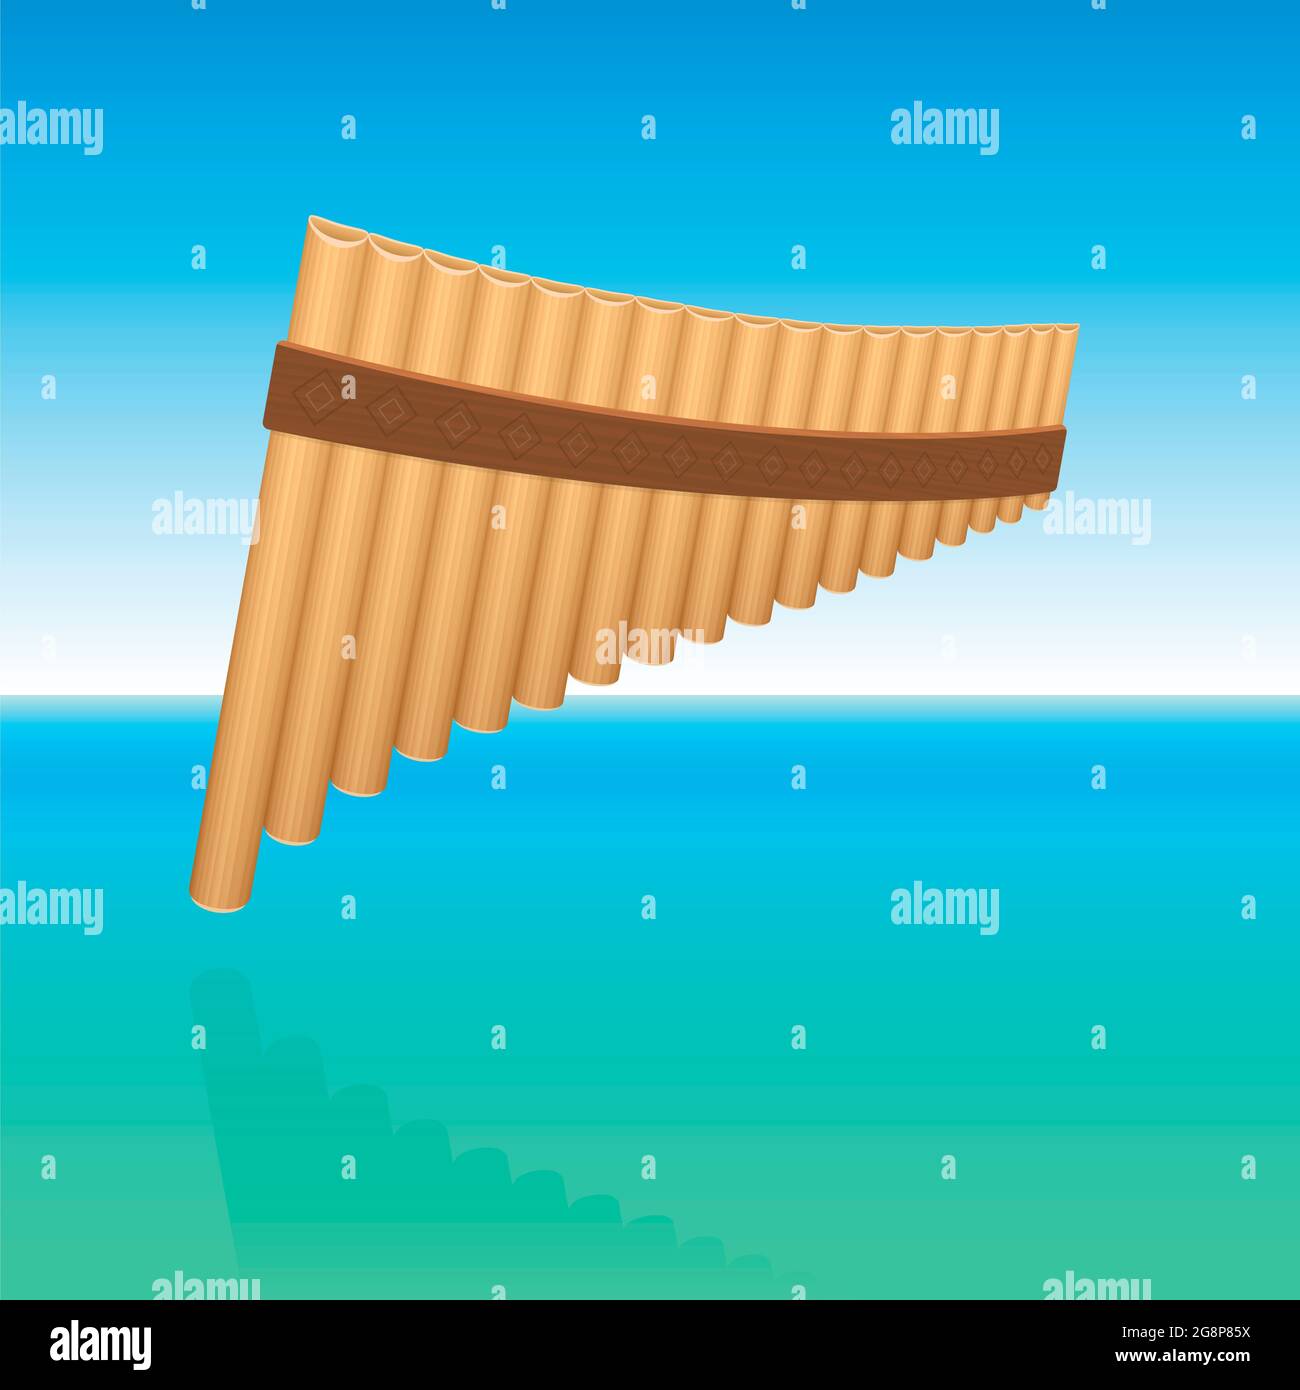 Pan flute floating above ocean water, symbolic for tranquil, meditative, peaceful music. Woodwind instrument for contemplation, inner peace, harmony. Stock Photo